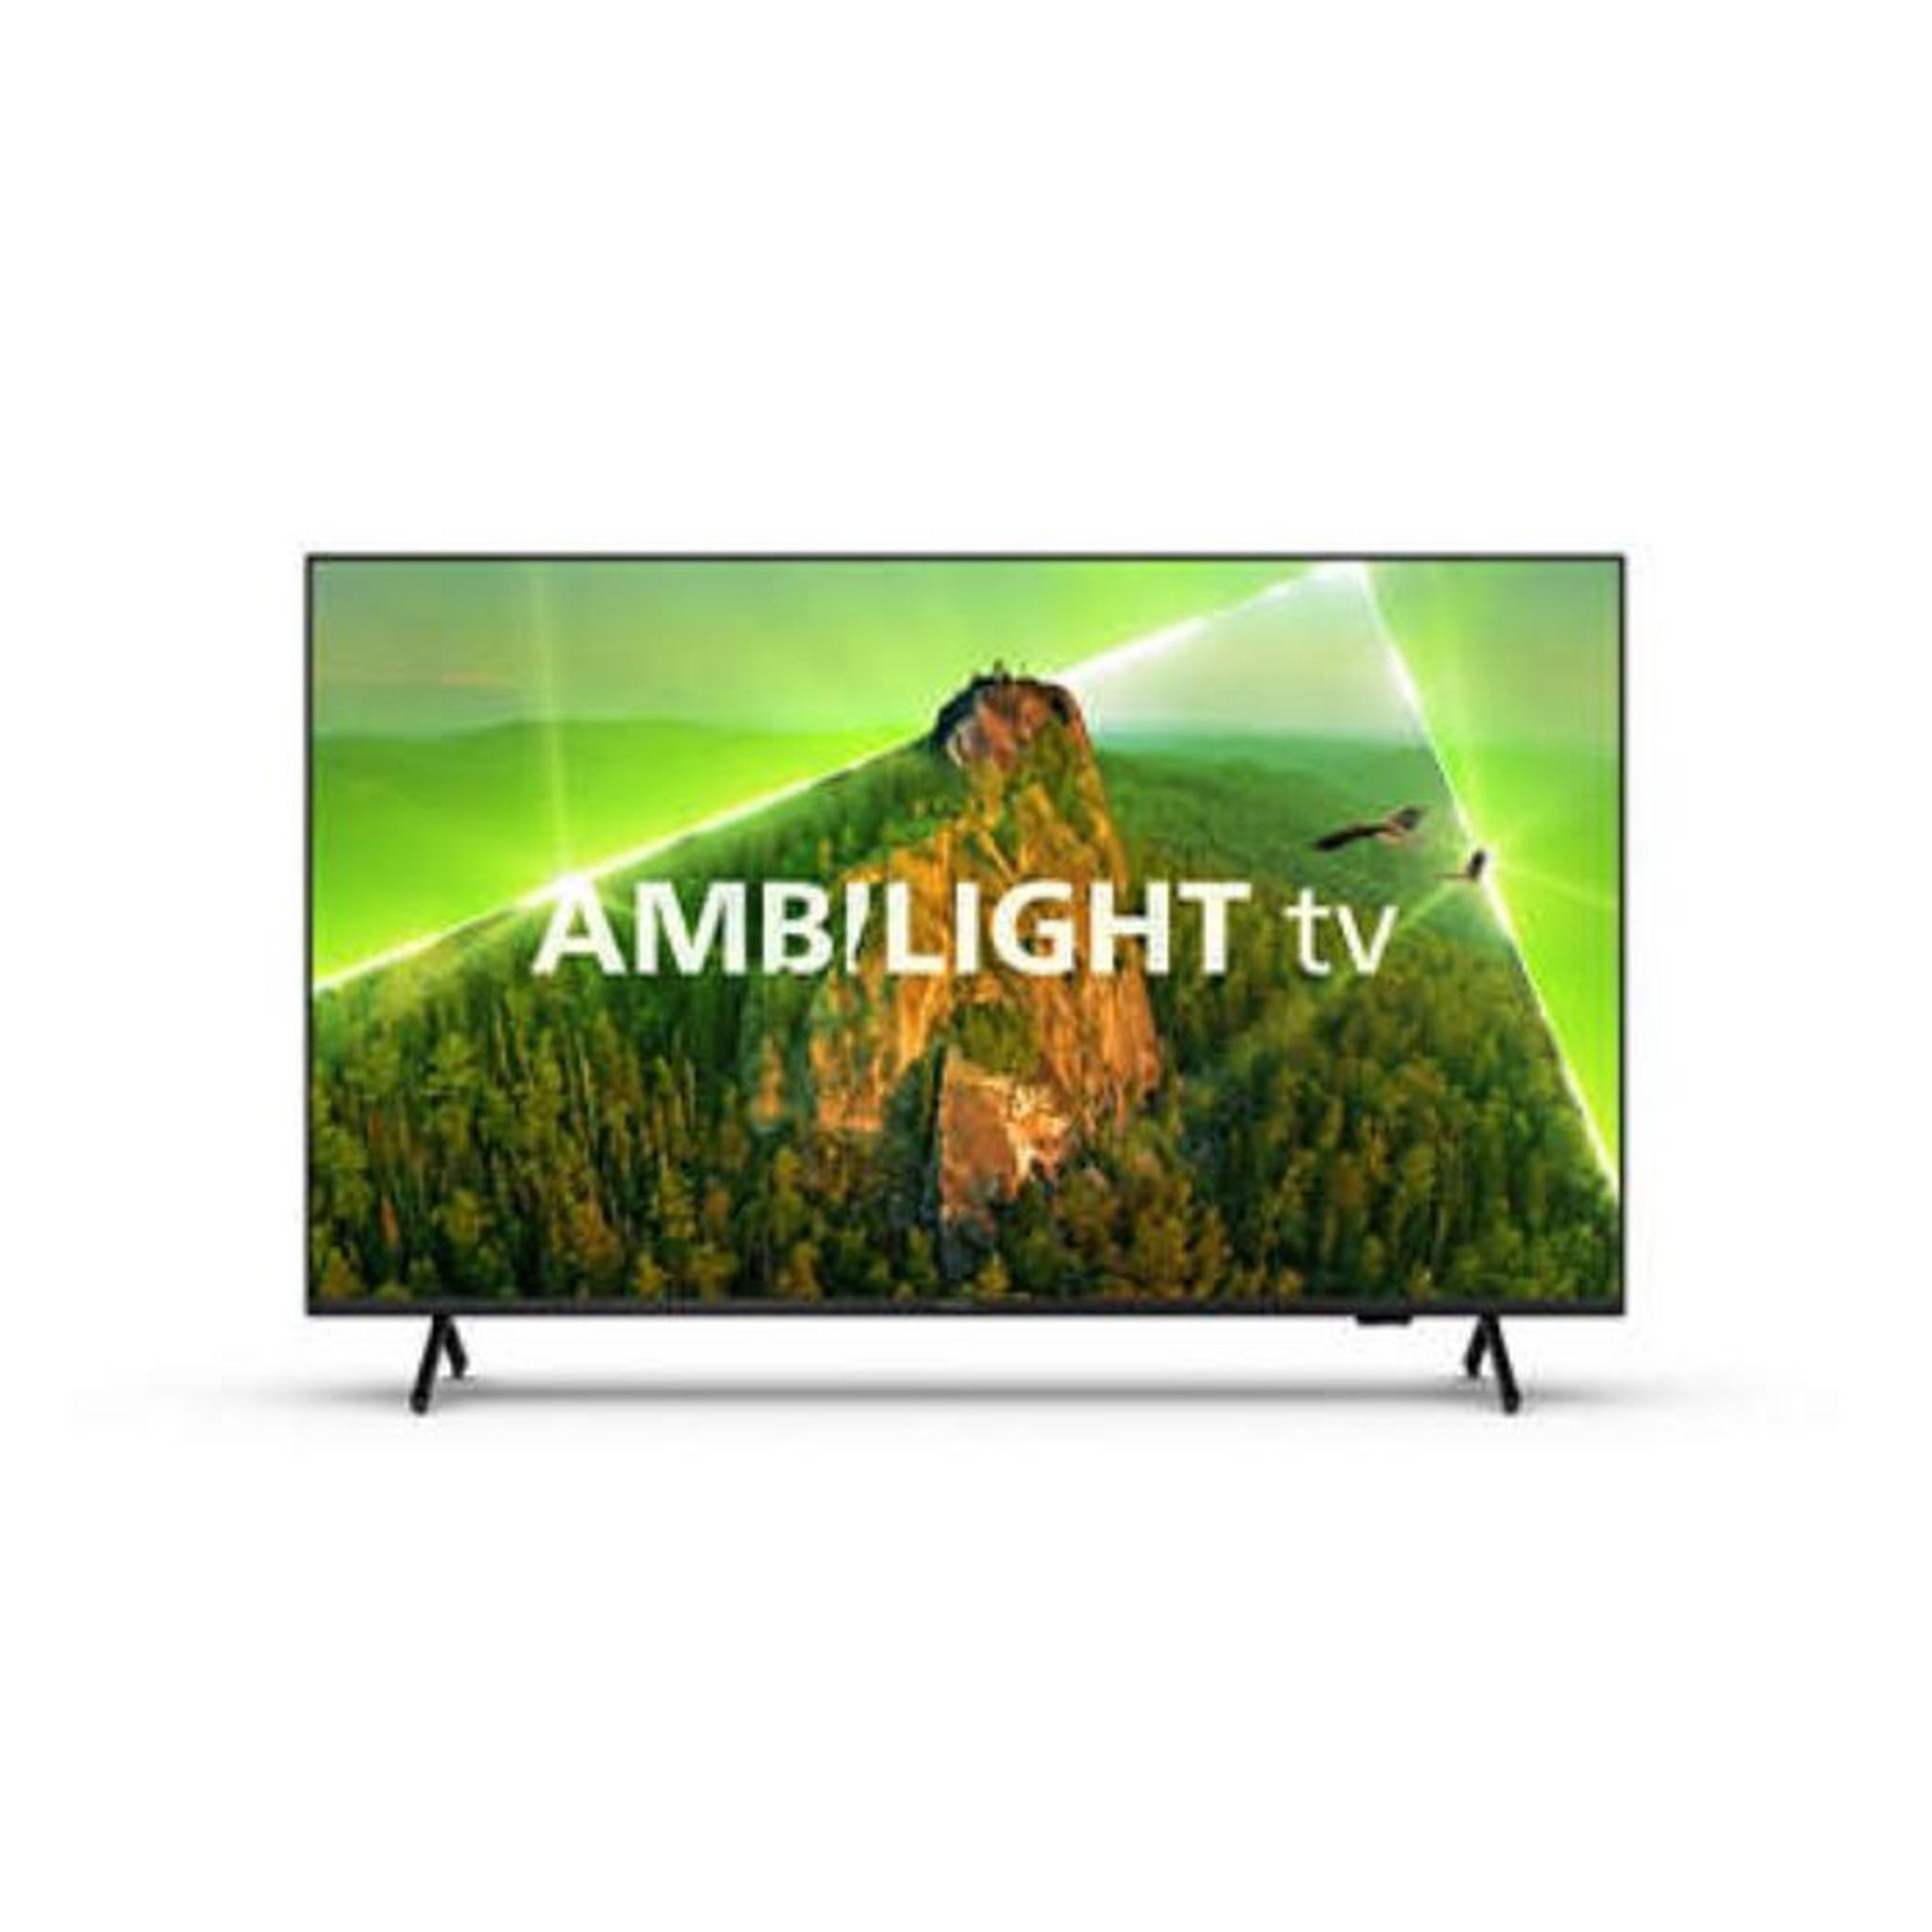 PHILIPS 70-inch 4K UHD Smart Android TV, 70PUT7908/56 – Black